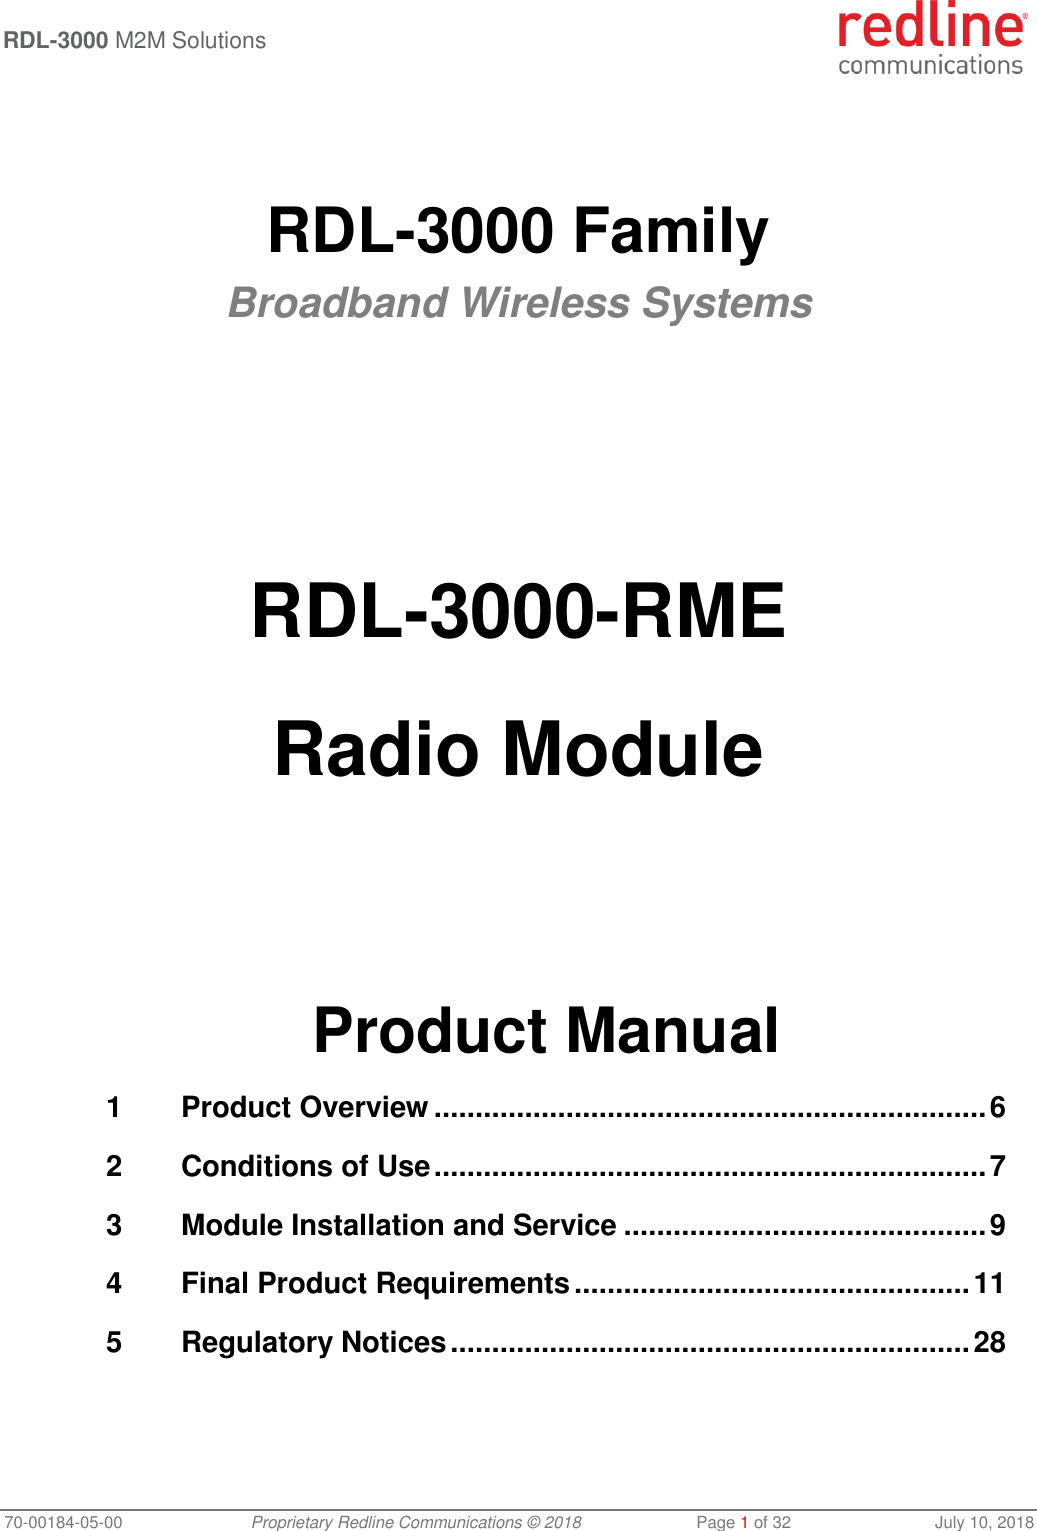  RDL-3000 M2M Solutions   70-00184-05-00 Proprietary Redline Communications © 2018  Page 1 of 32  July 10, 2018   RDL-3000 Family Broadband Wireless Systems         RDL-3000-RME  Radio Module       Product Manual 1 Product Overview ................................................................... 6 2 Conditions of Use ................................................................... 7 3 Module Installation and Service ............................................ 9 4 Final Product Requirements ................................................ 11 5 Regulatory Notices ............................................................... 28 